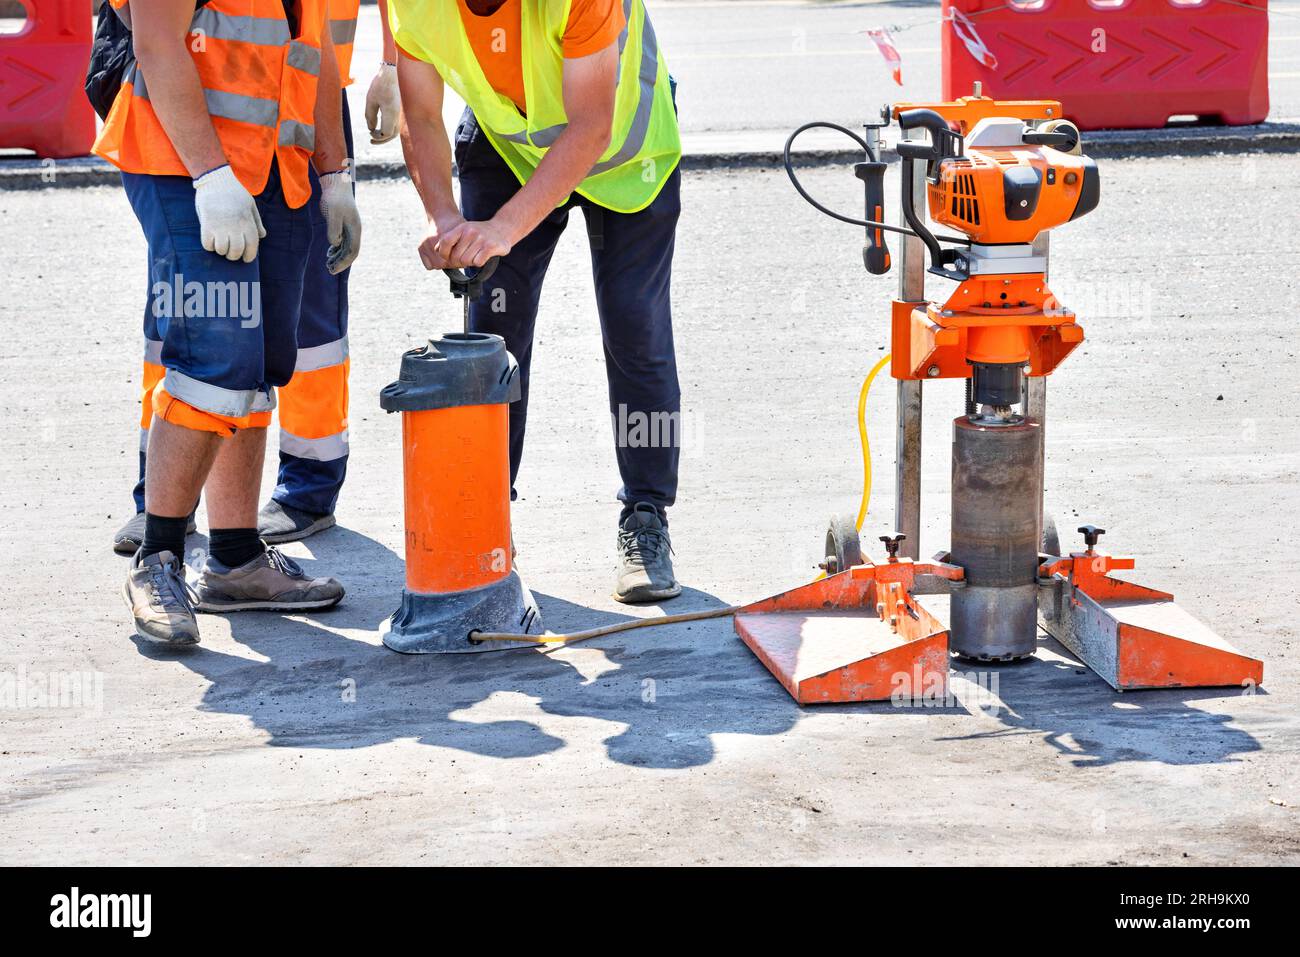 Road workers use a core drill to extract cores from an asphalt pavement during road repairs. Copy space. Stock Photo